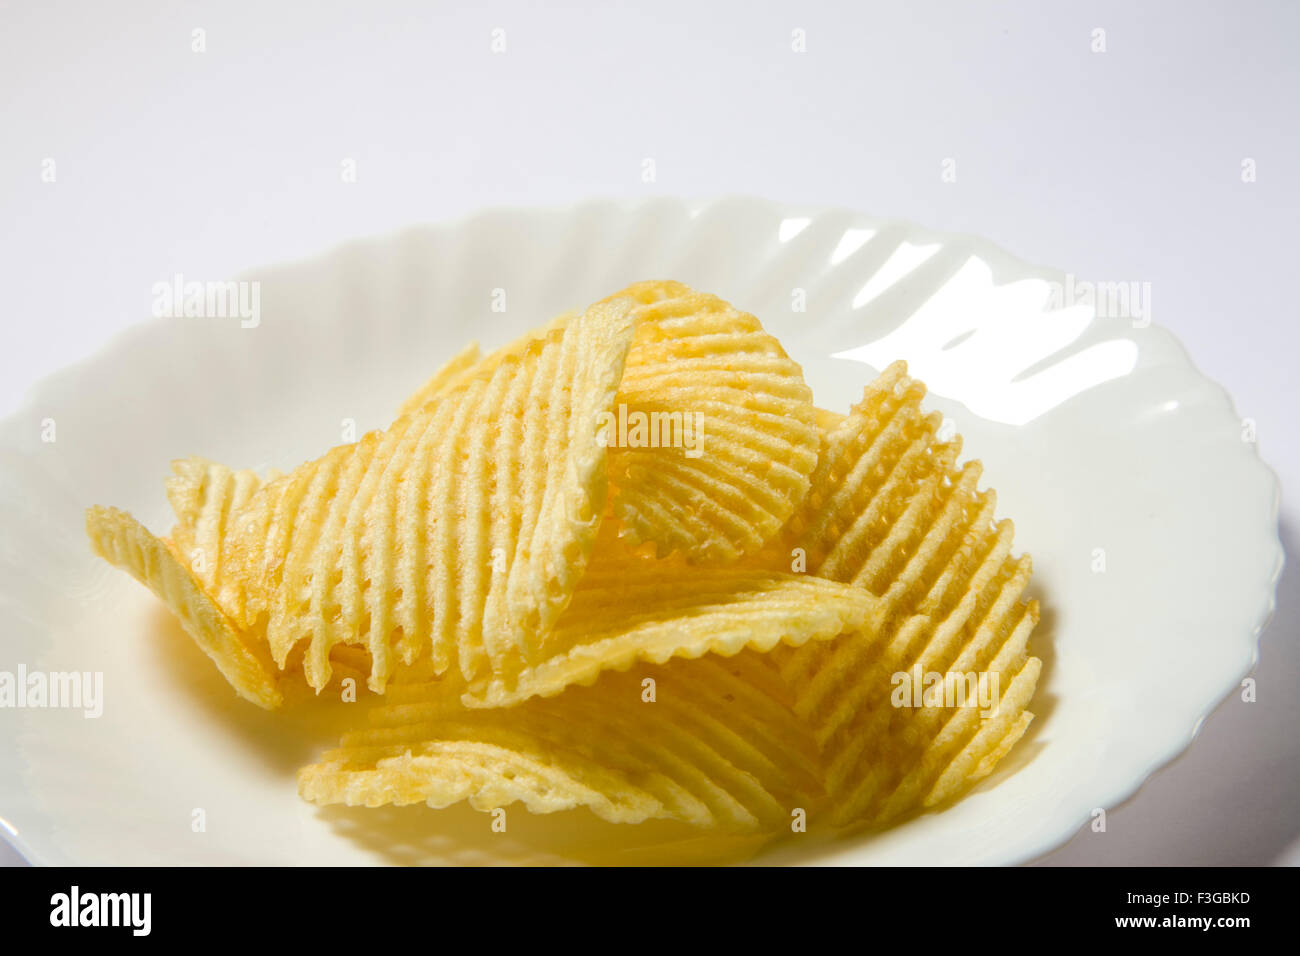 Junk food snacks salty potato chips or wafer served in plate Stock Photo